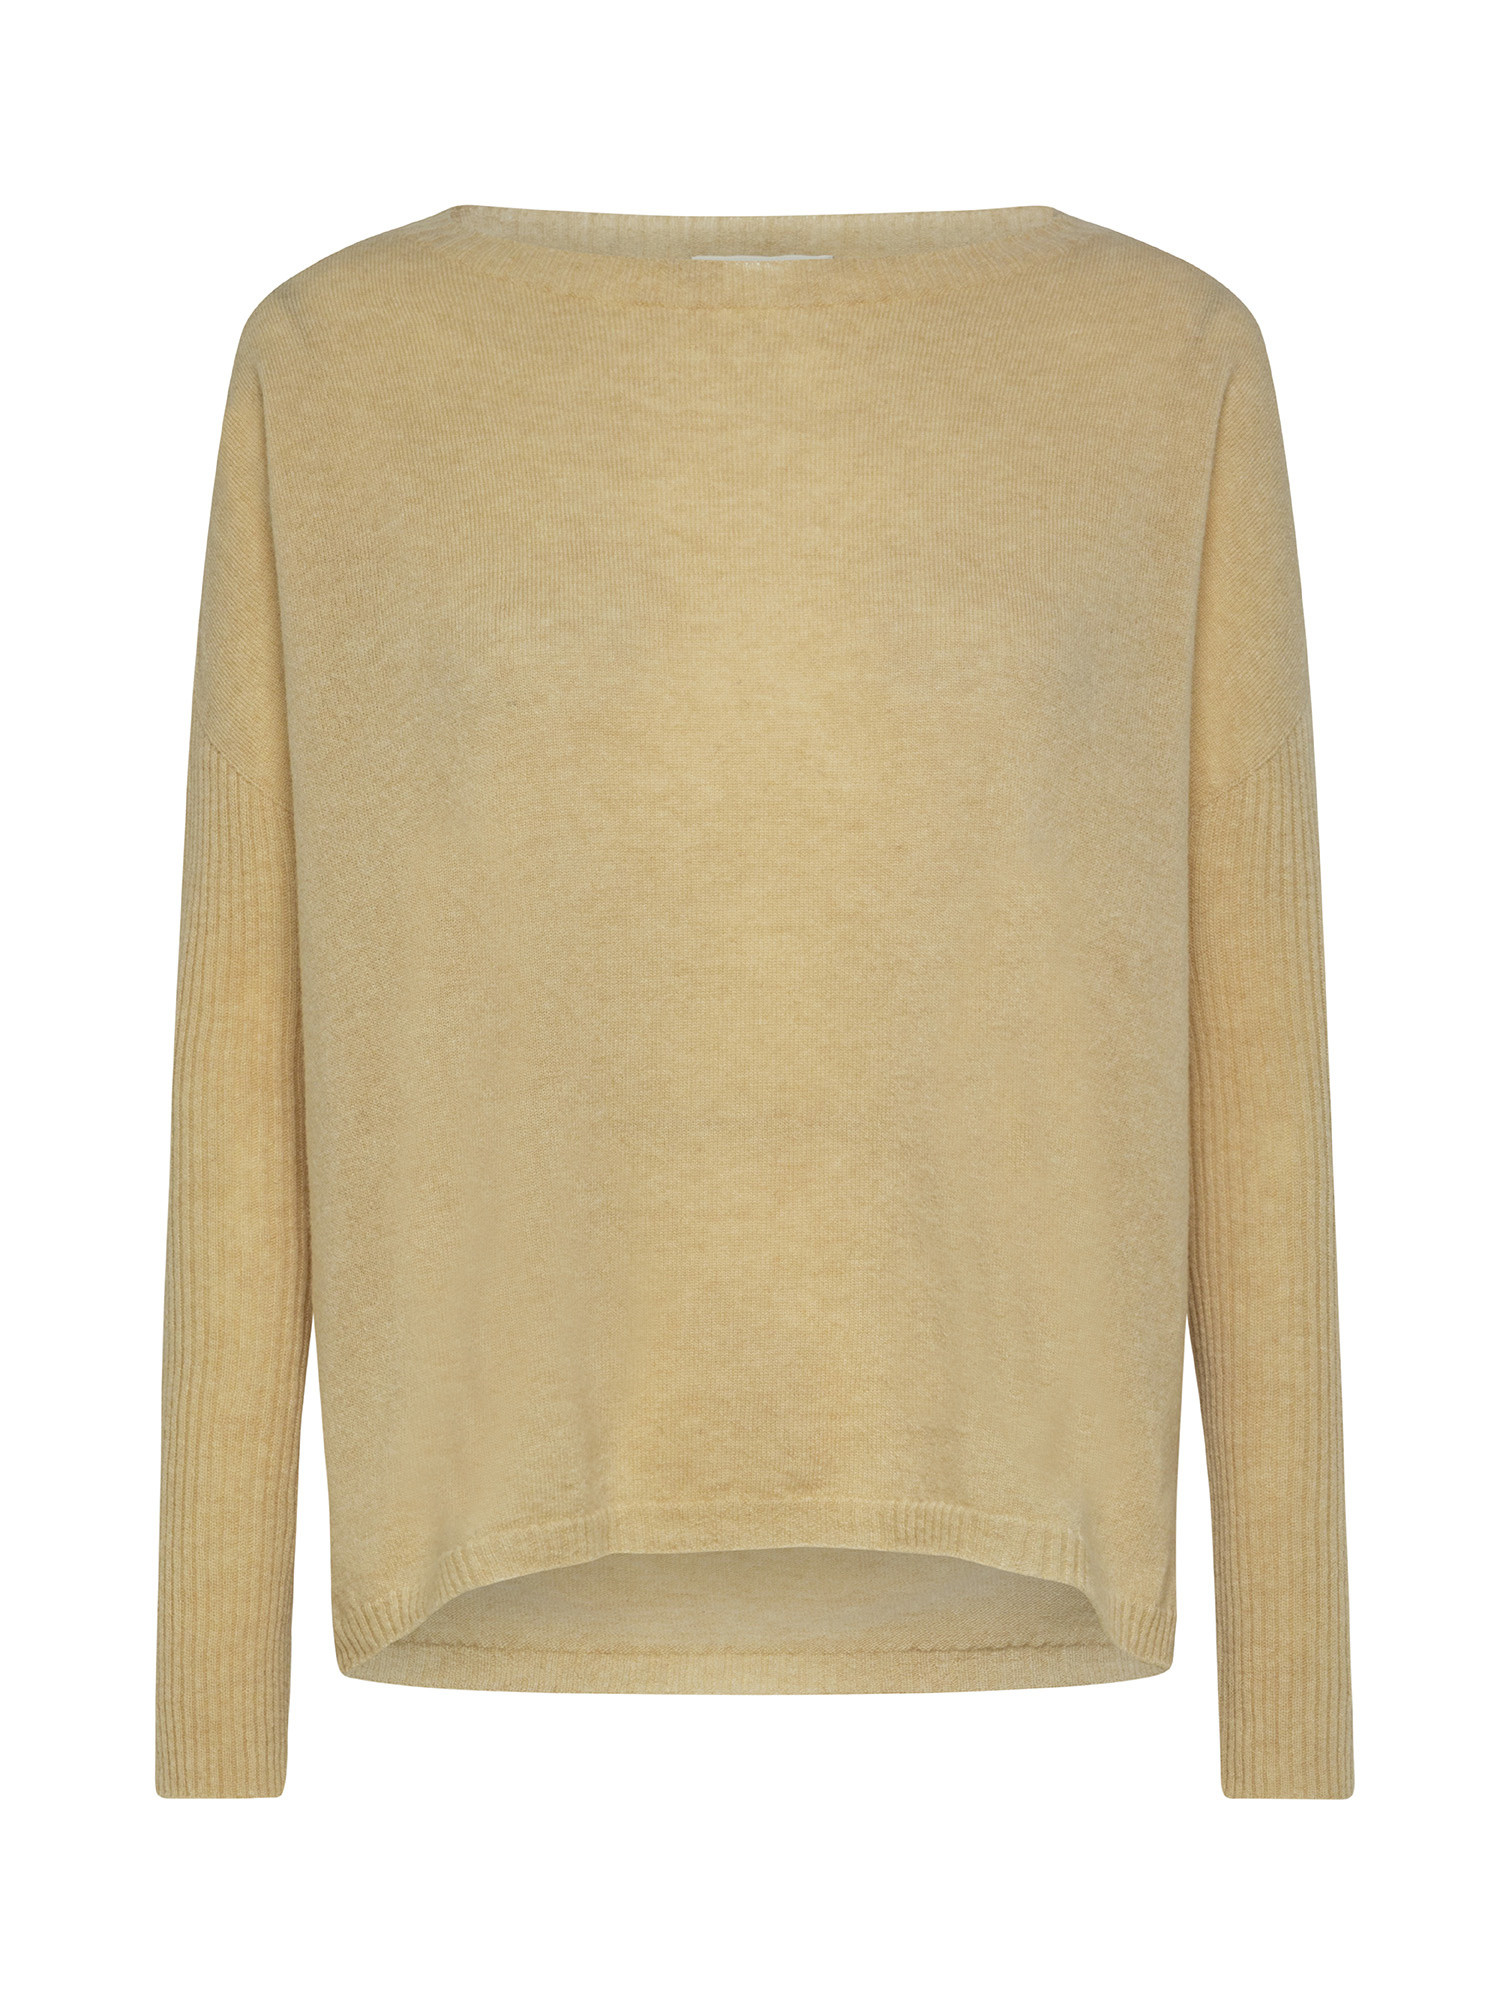 K Collection - Maglia girocollo, Beige, large image number 0